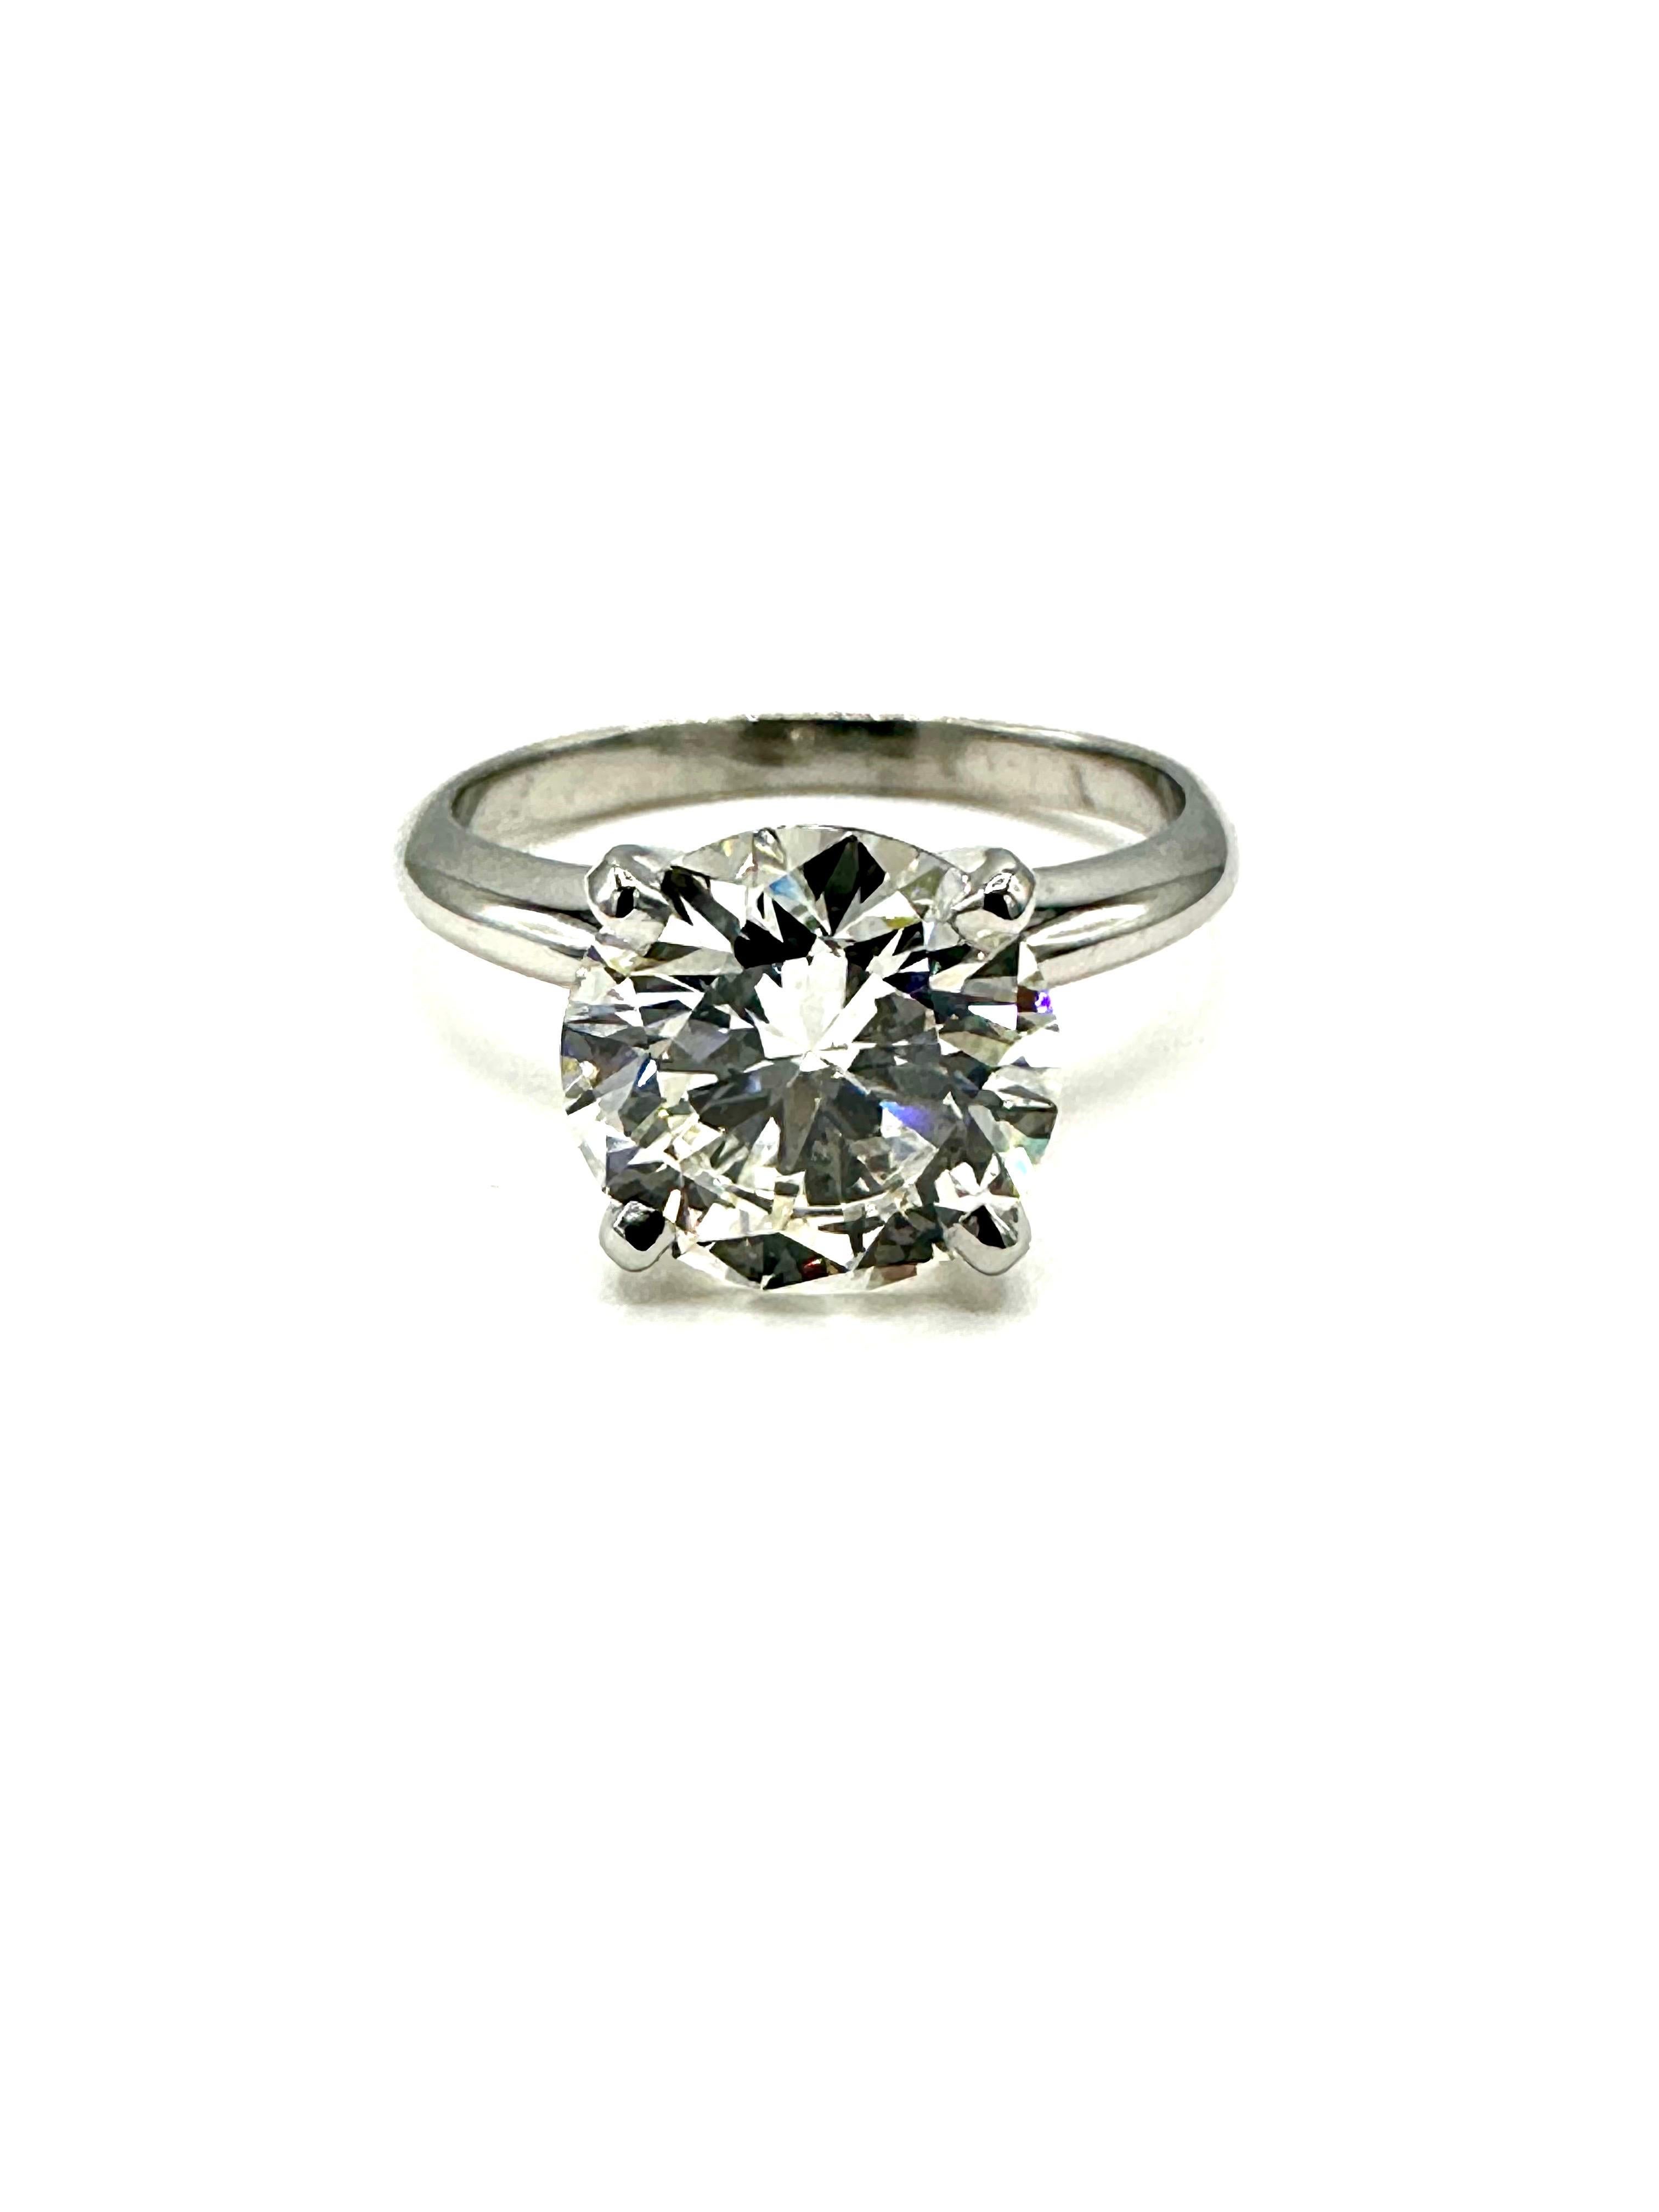 A stunning round brilliant Diamond and platinum engagement ring!  The Diamond is set in a four prong 